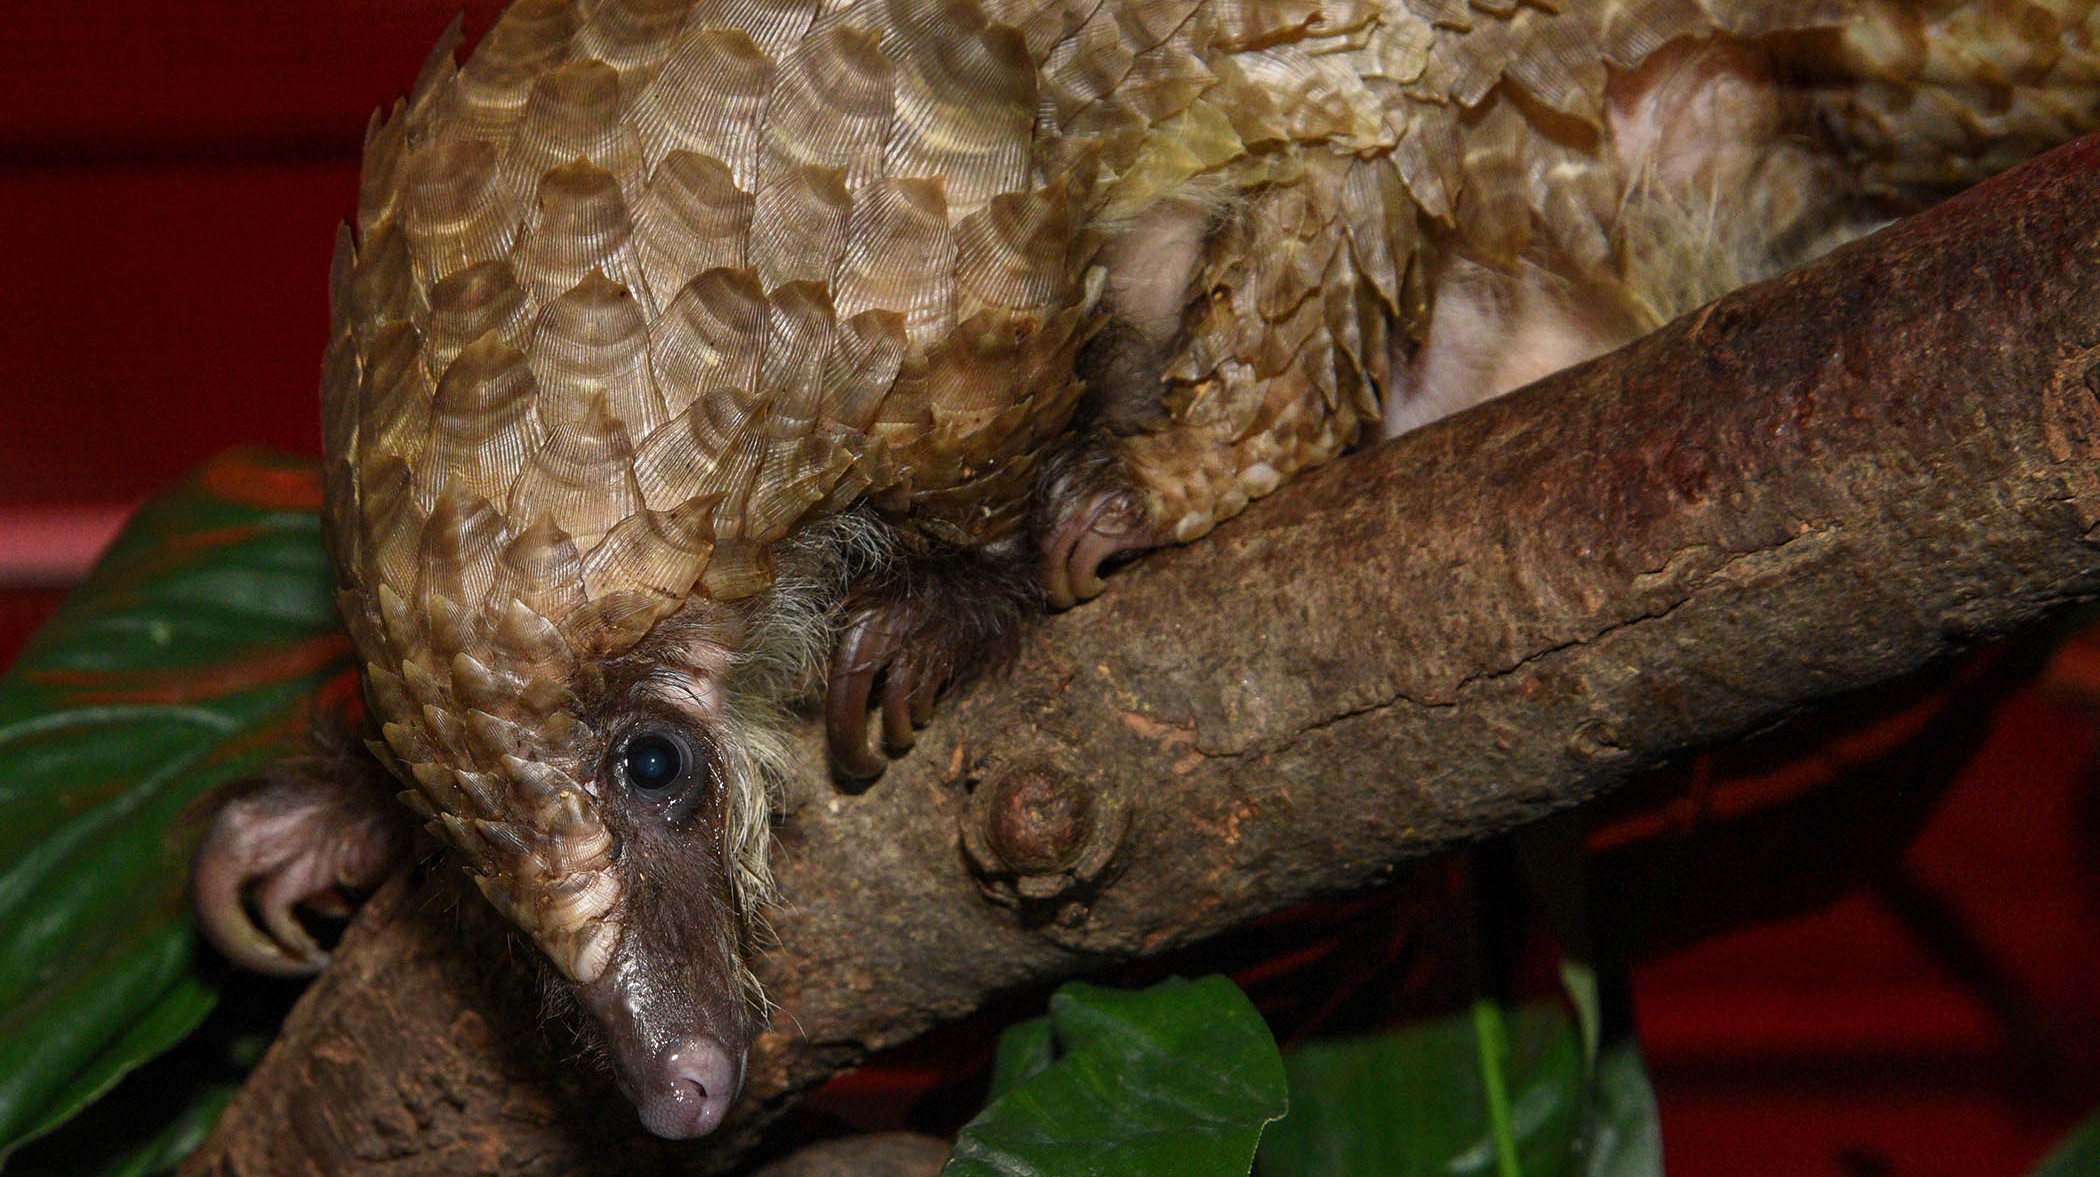 https://www.czs.org/Chicago-Zoological-Society/About/Press-room/2017-Press-Releases/Chicago-Zoological-Society-Leading-Conservation-Ef/DSC_8343-Pangolin.aspx